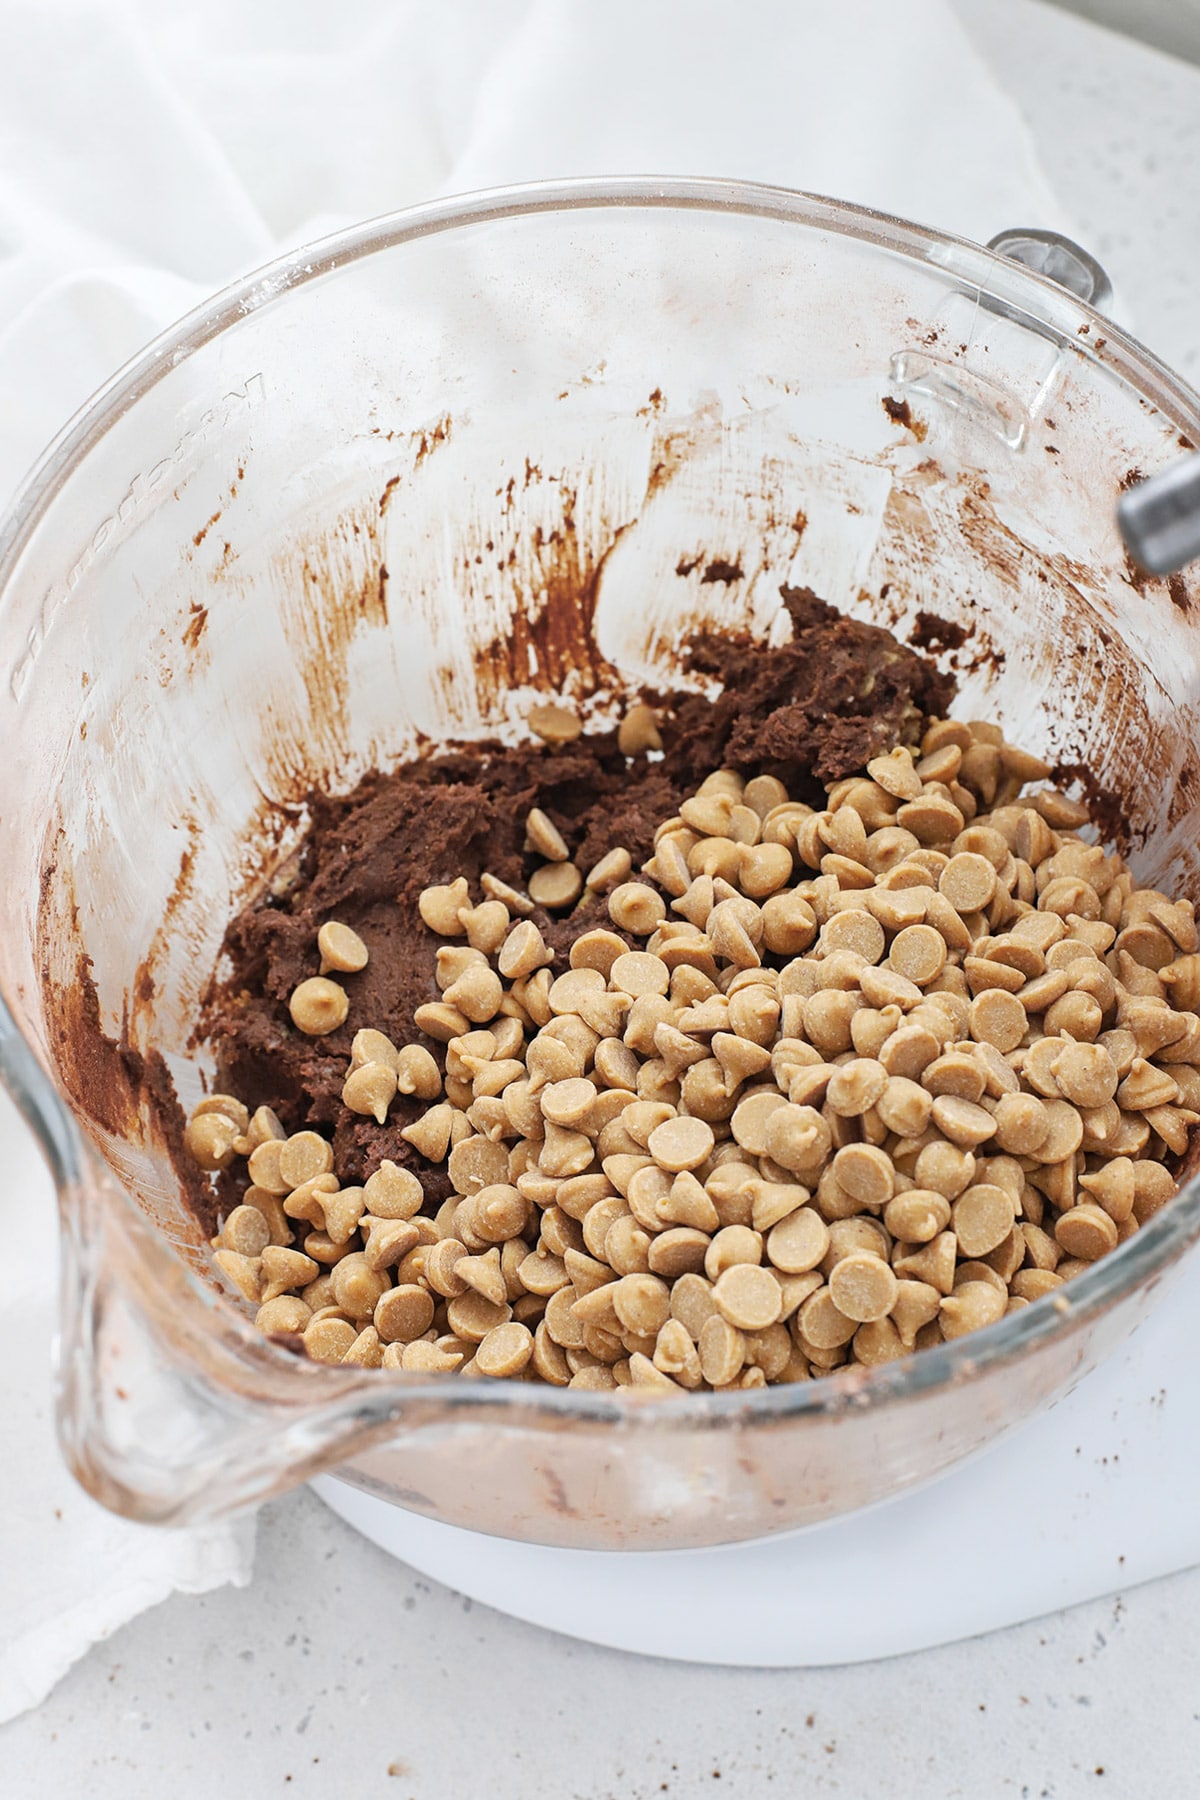 Adding peanut butter chips to gluten-free levain chocolate peanut butter chip cookies dough